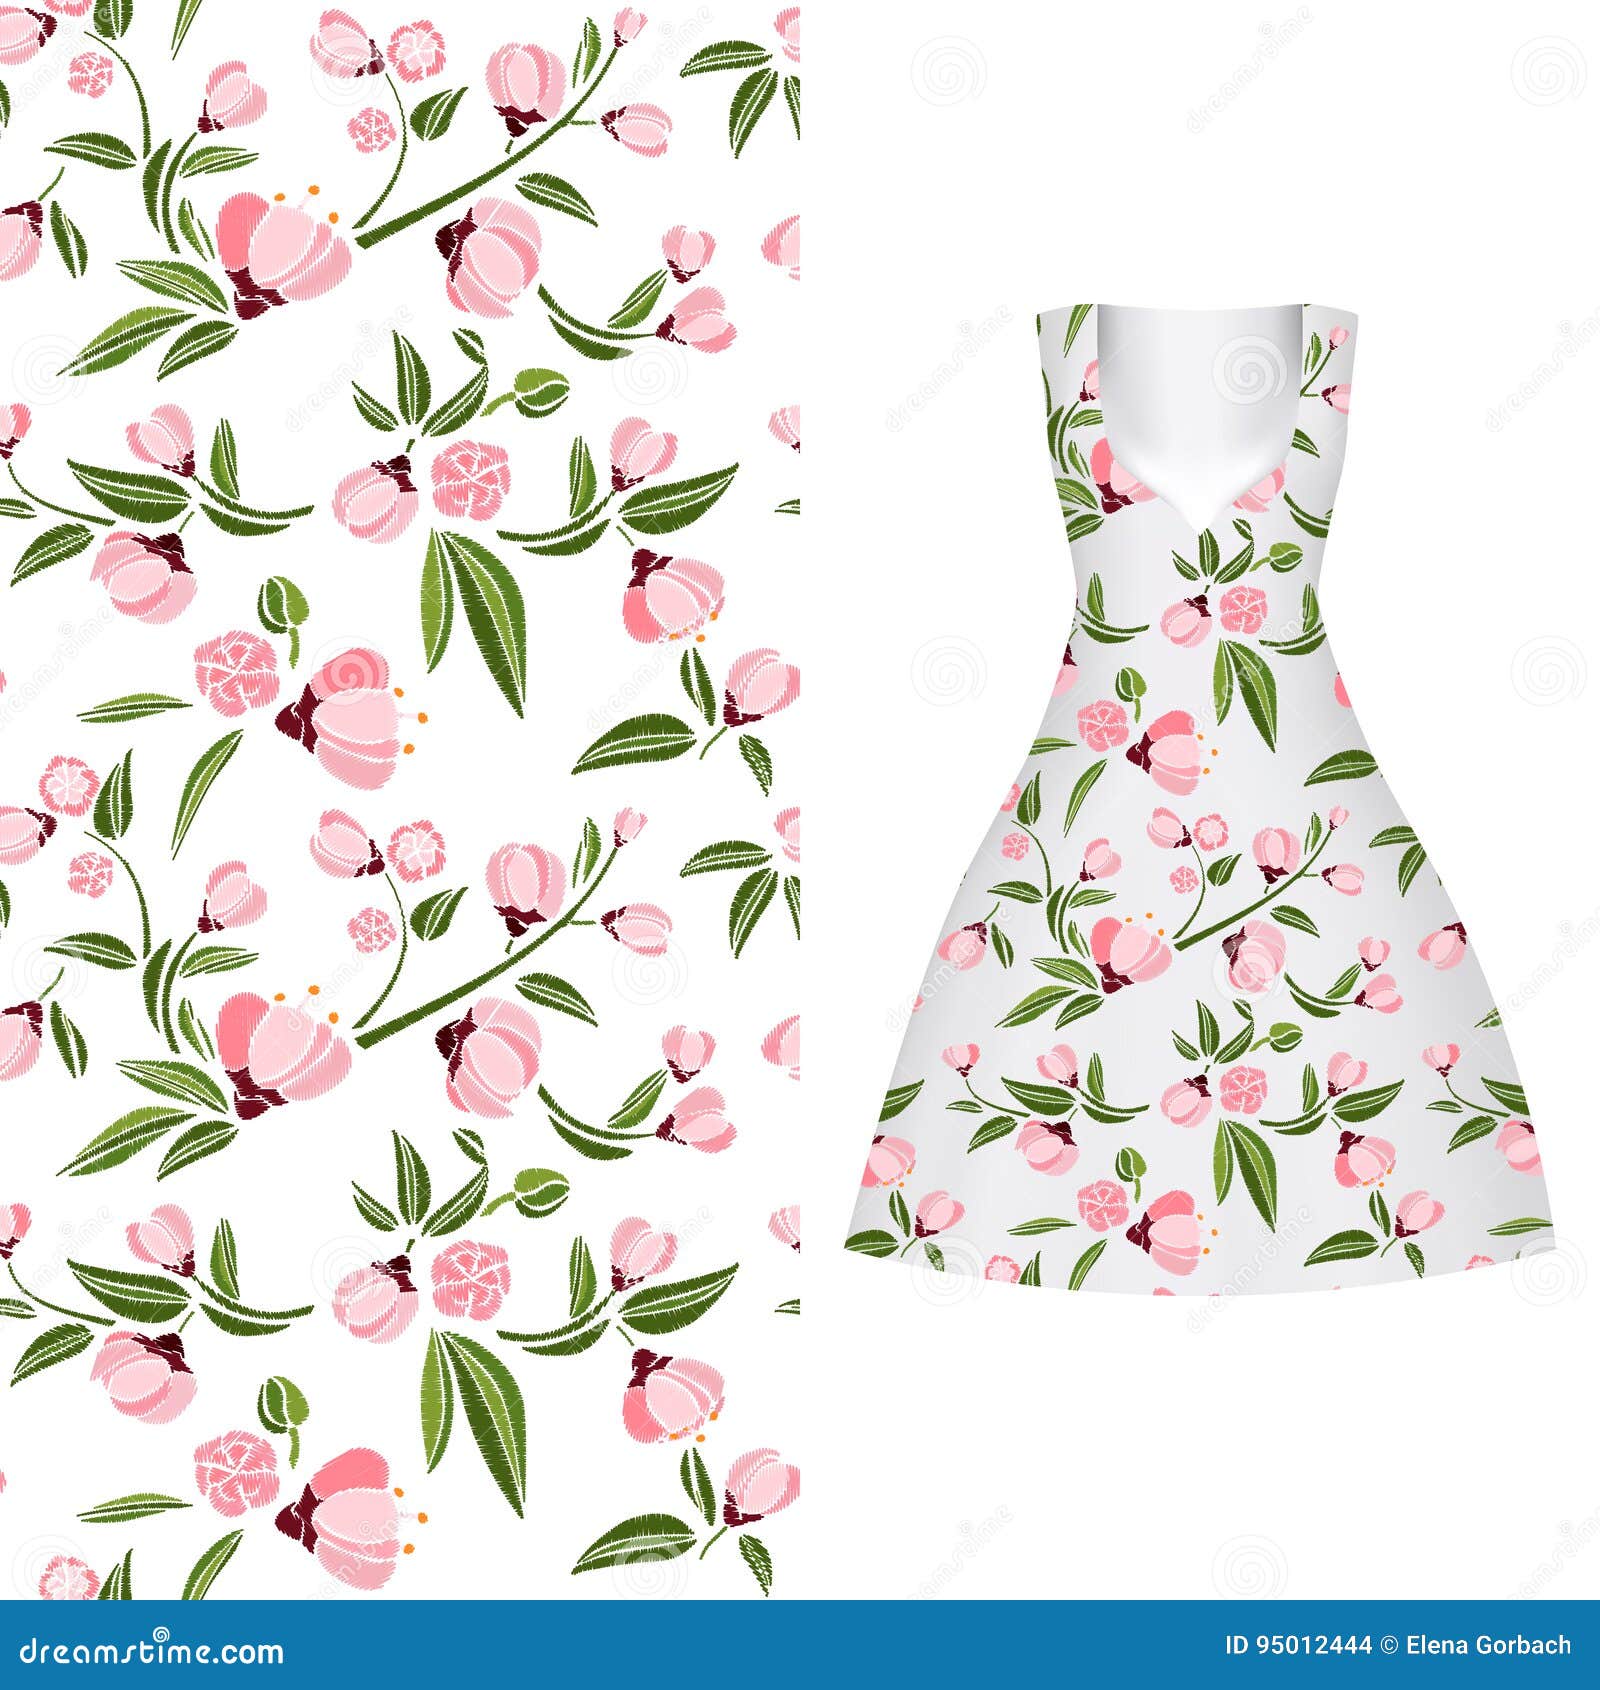 Download Vector Seamless Embroidery, Floral Pattern Of Leaves And ...